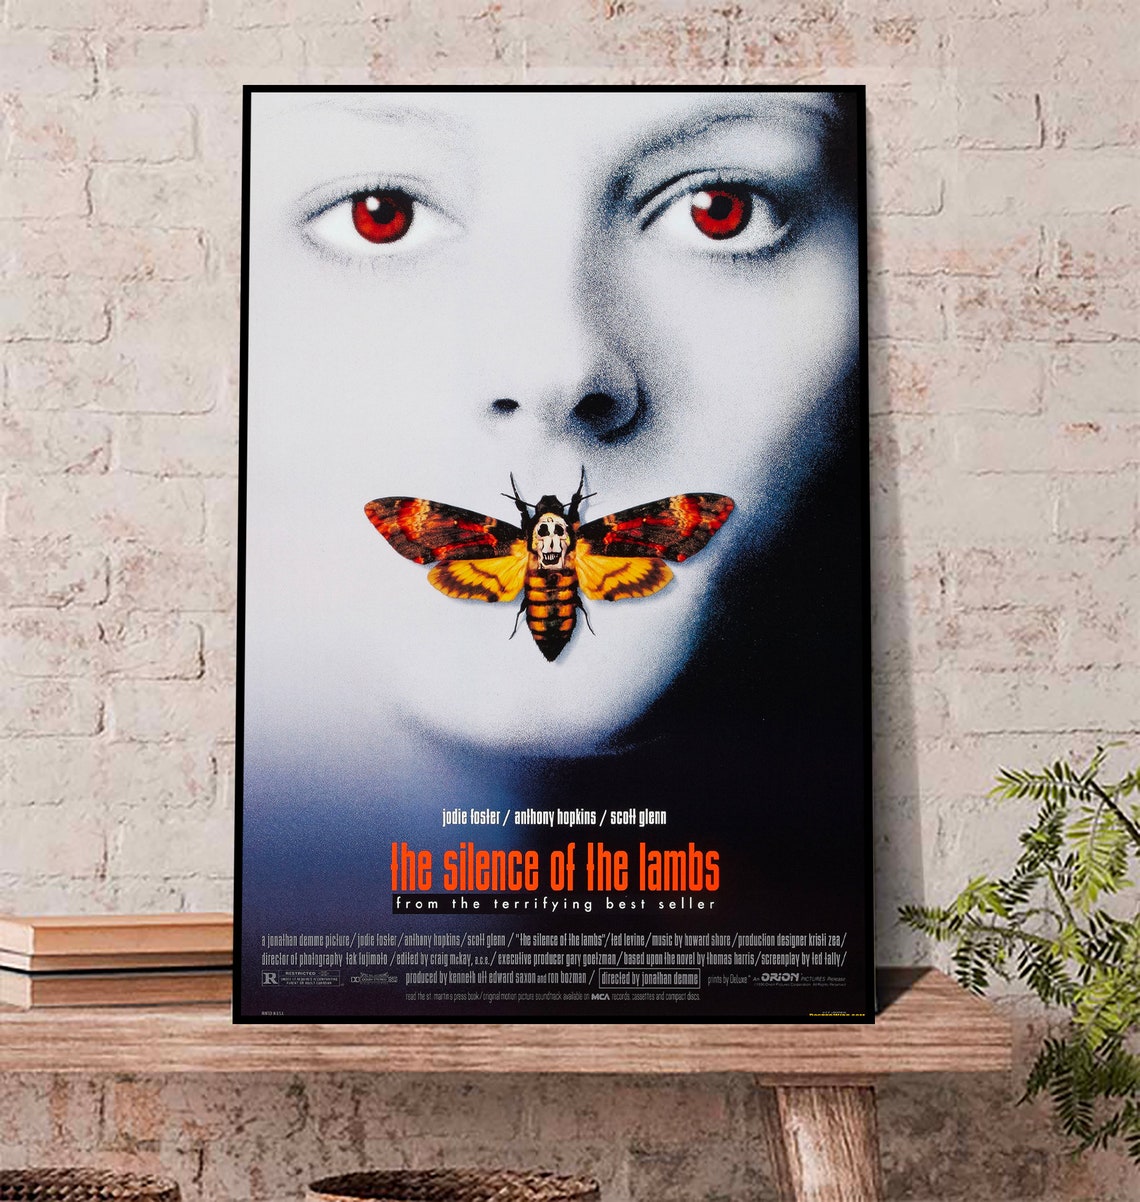 The silence of the lambs Poster, Movies Poster, Old Vintage Movies Wall Art Canvas Poster, Horror Movies Poster 